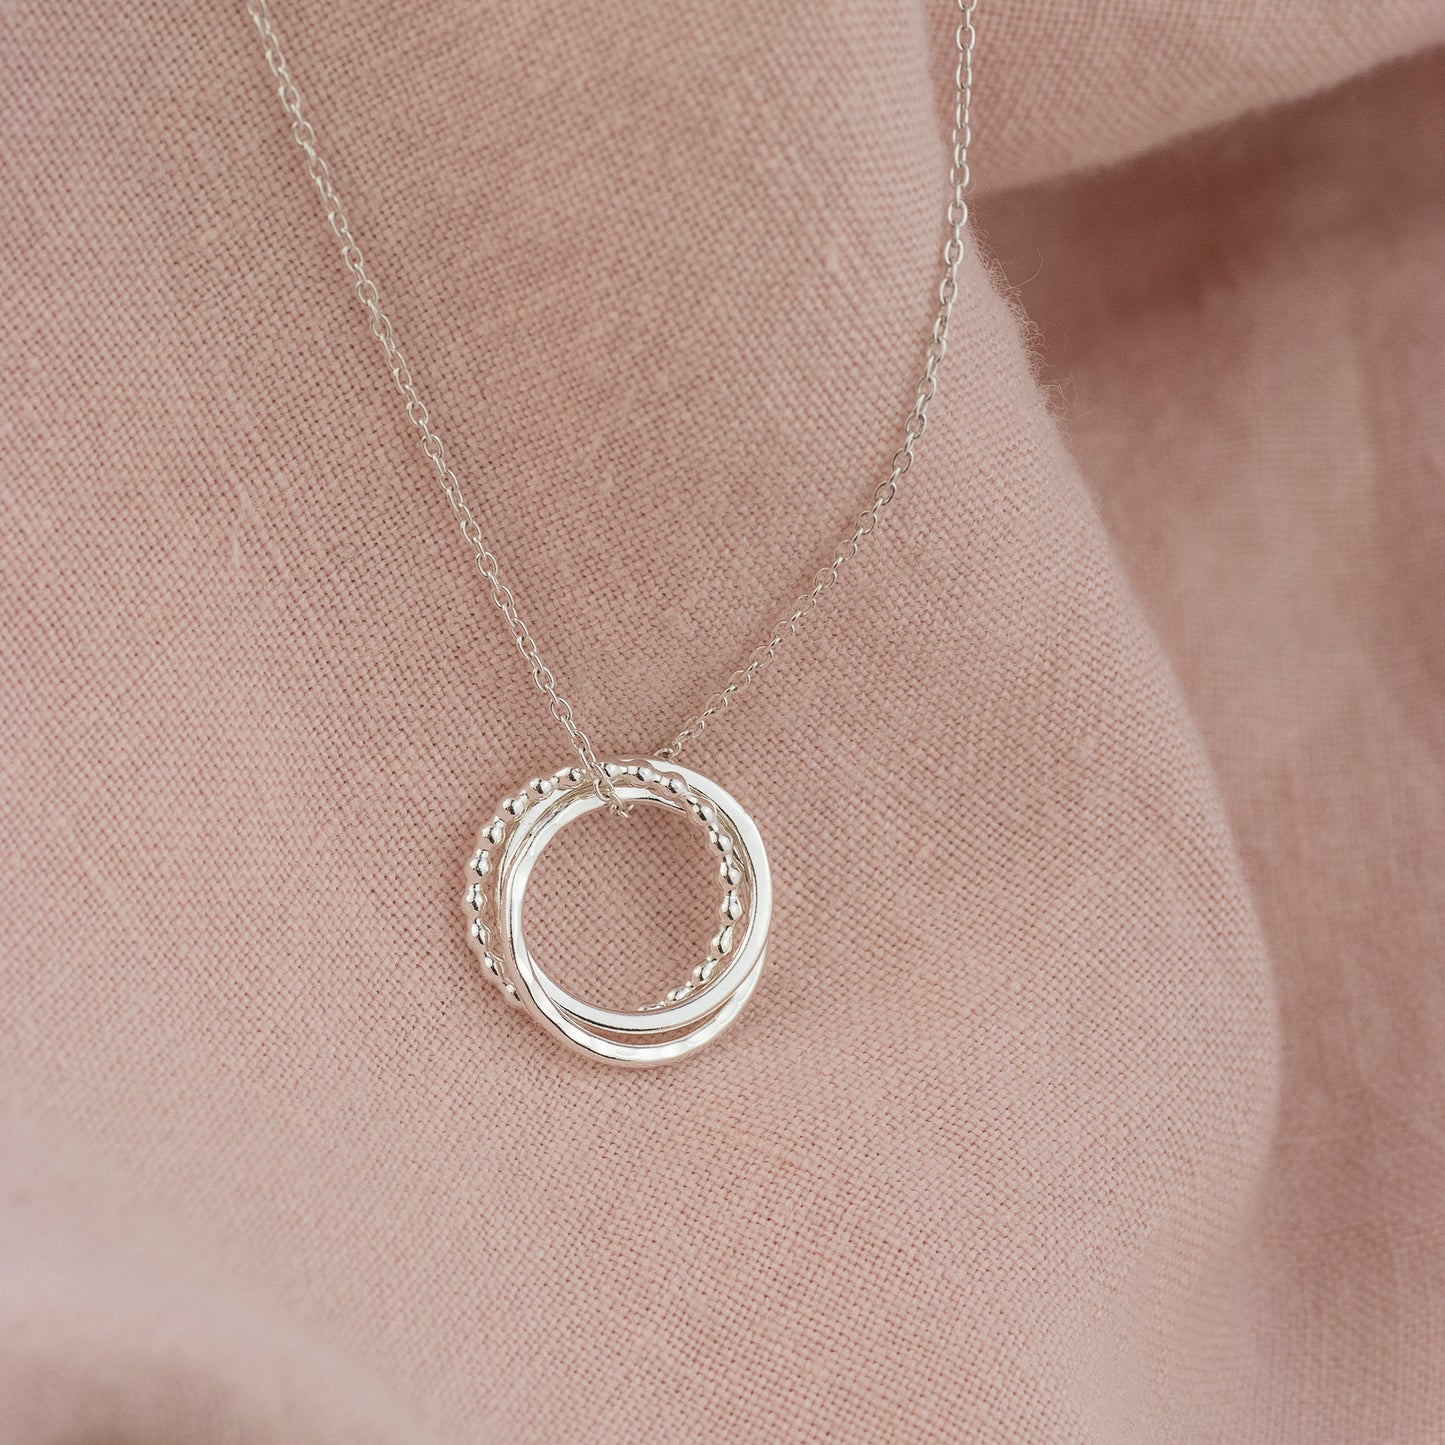 3rd Anniversary Necklace - The Original 3 Rings for 3 Years Necklace - Petite Silver